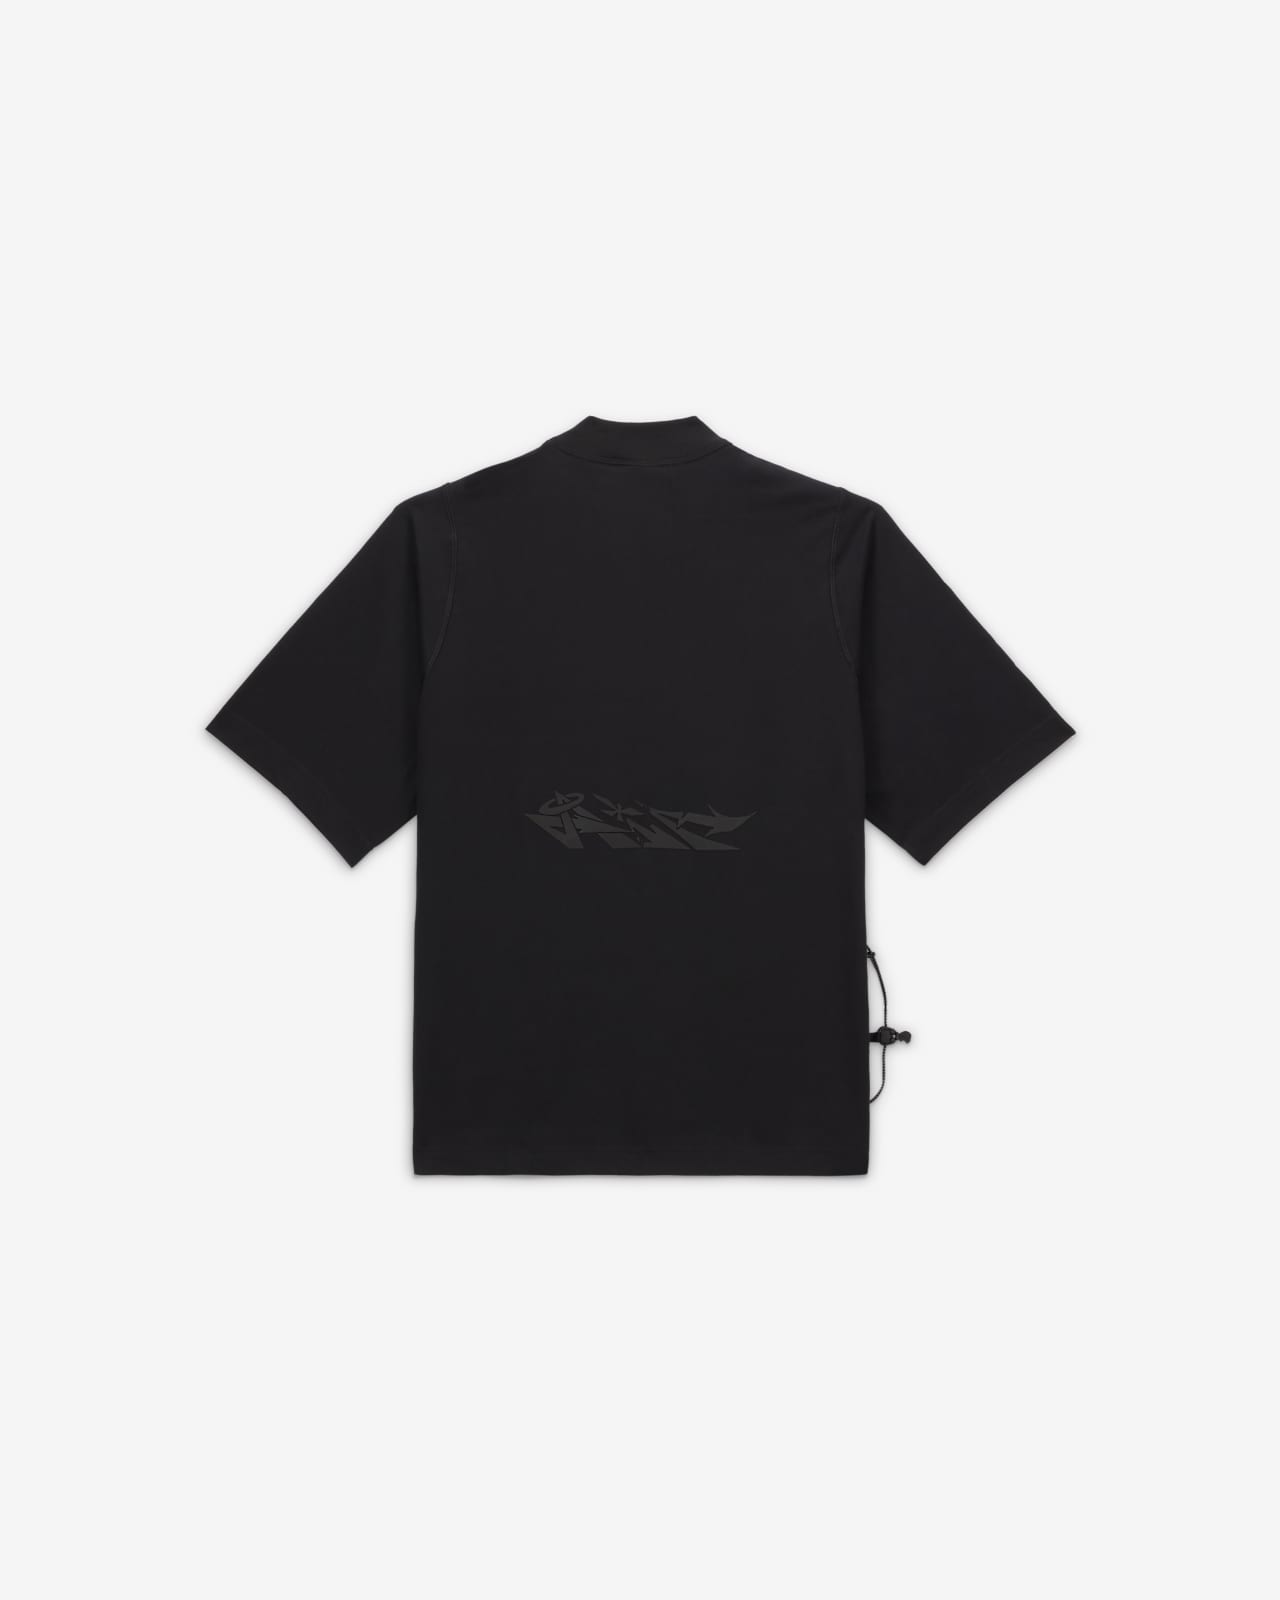 Nike x Off-White™ Short-Sleeve Top